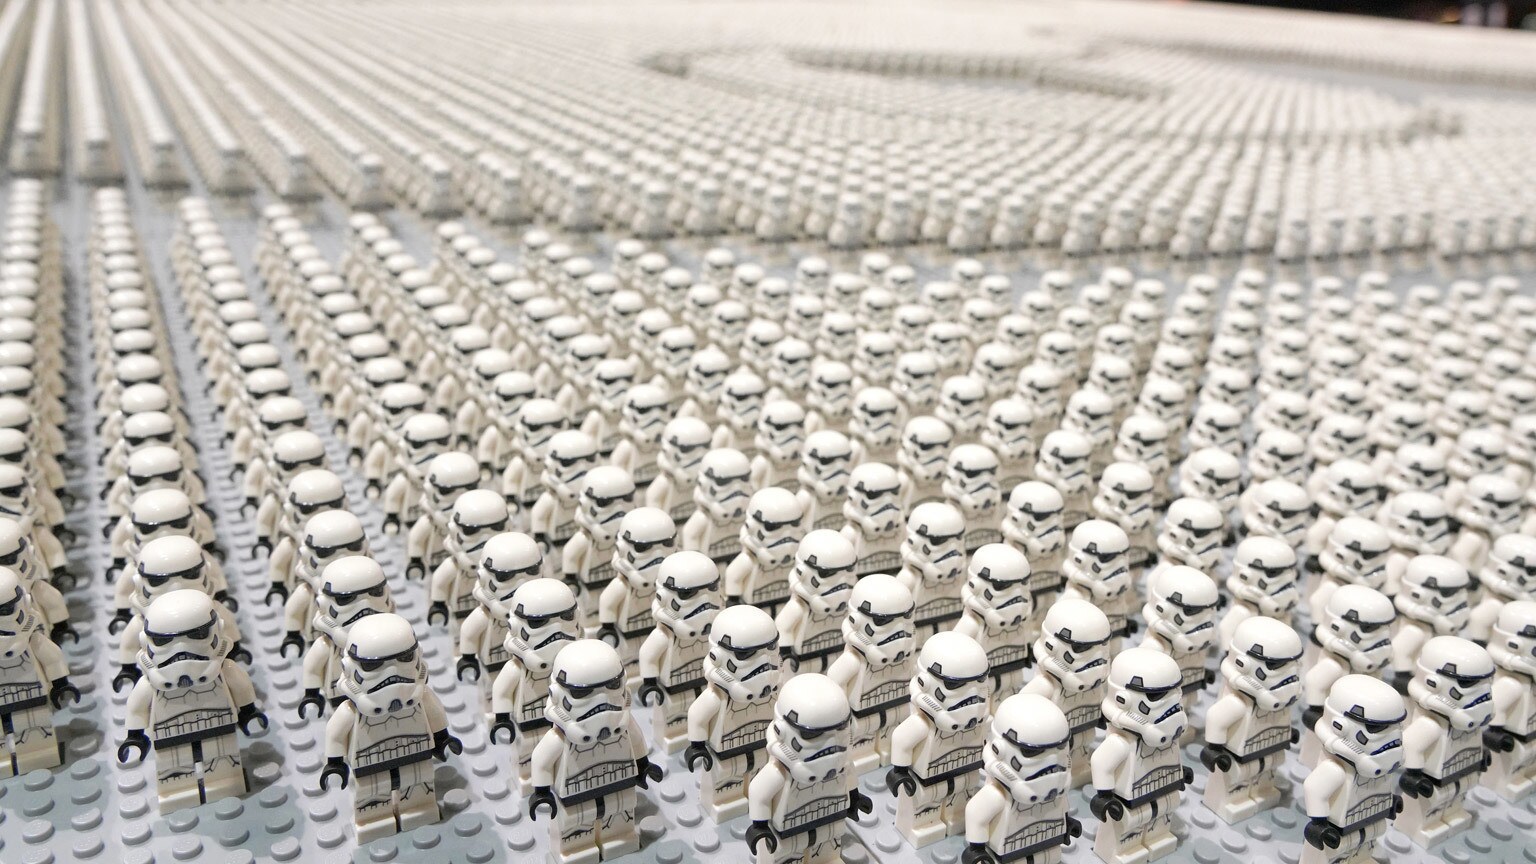 SWCC 2019: LEGO Breaks Guinness World Record with an Army of 36,440 Stormtrooper Minifigures